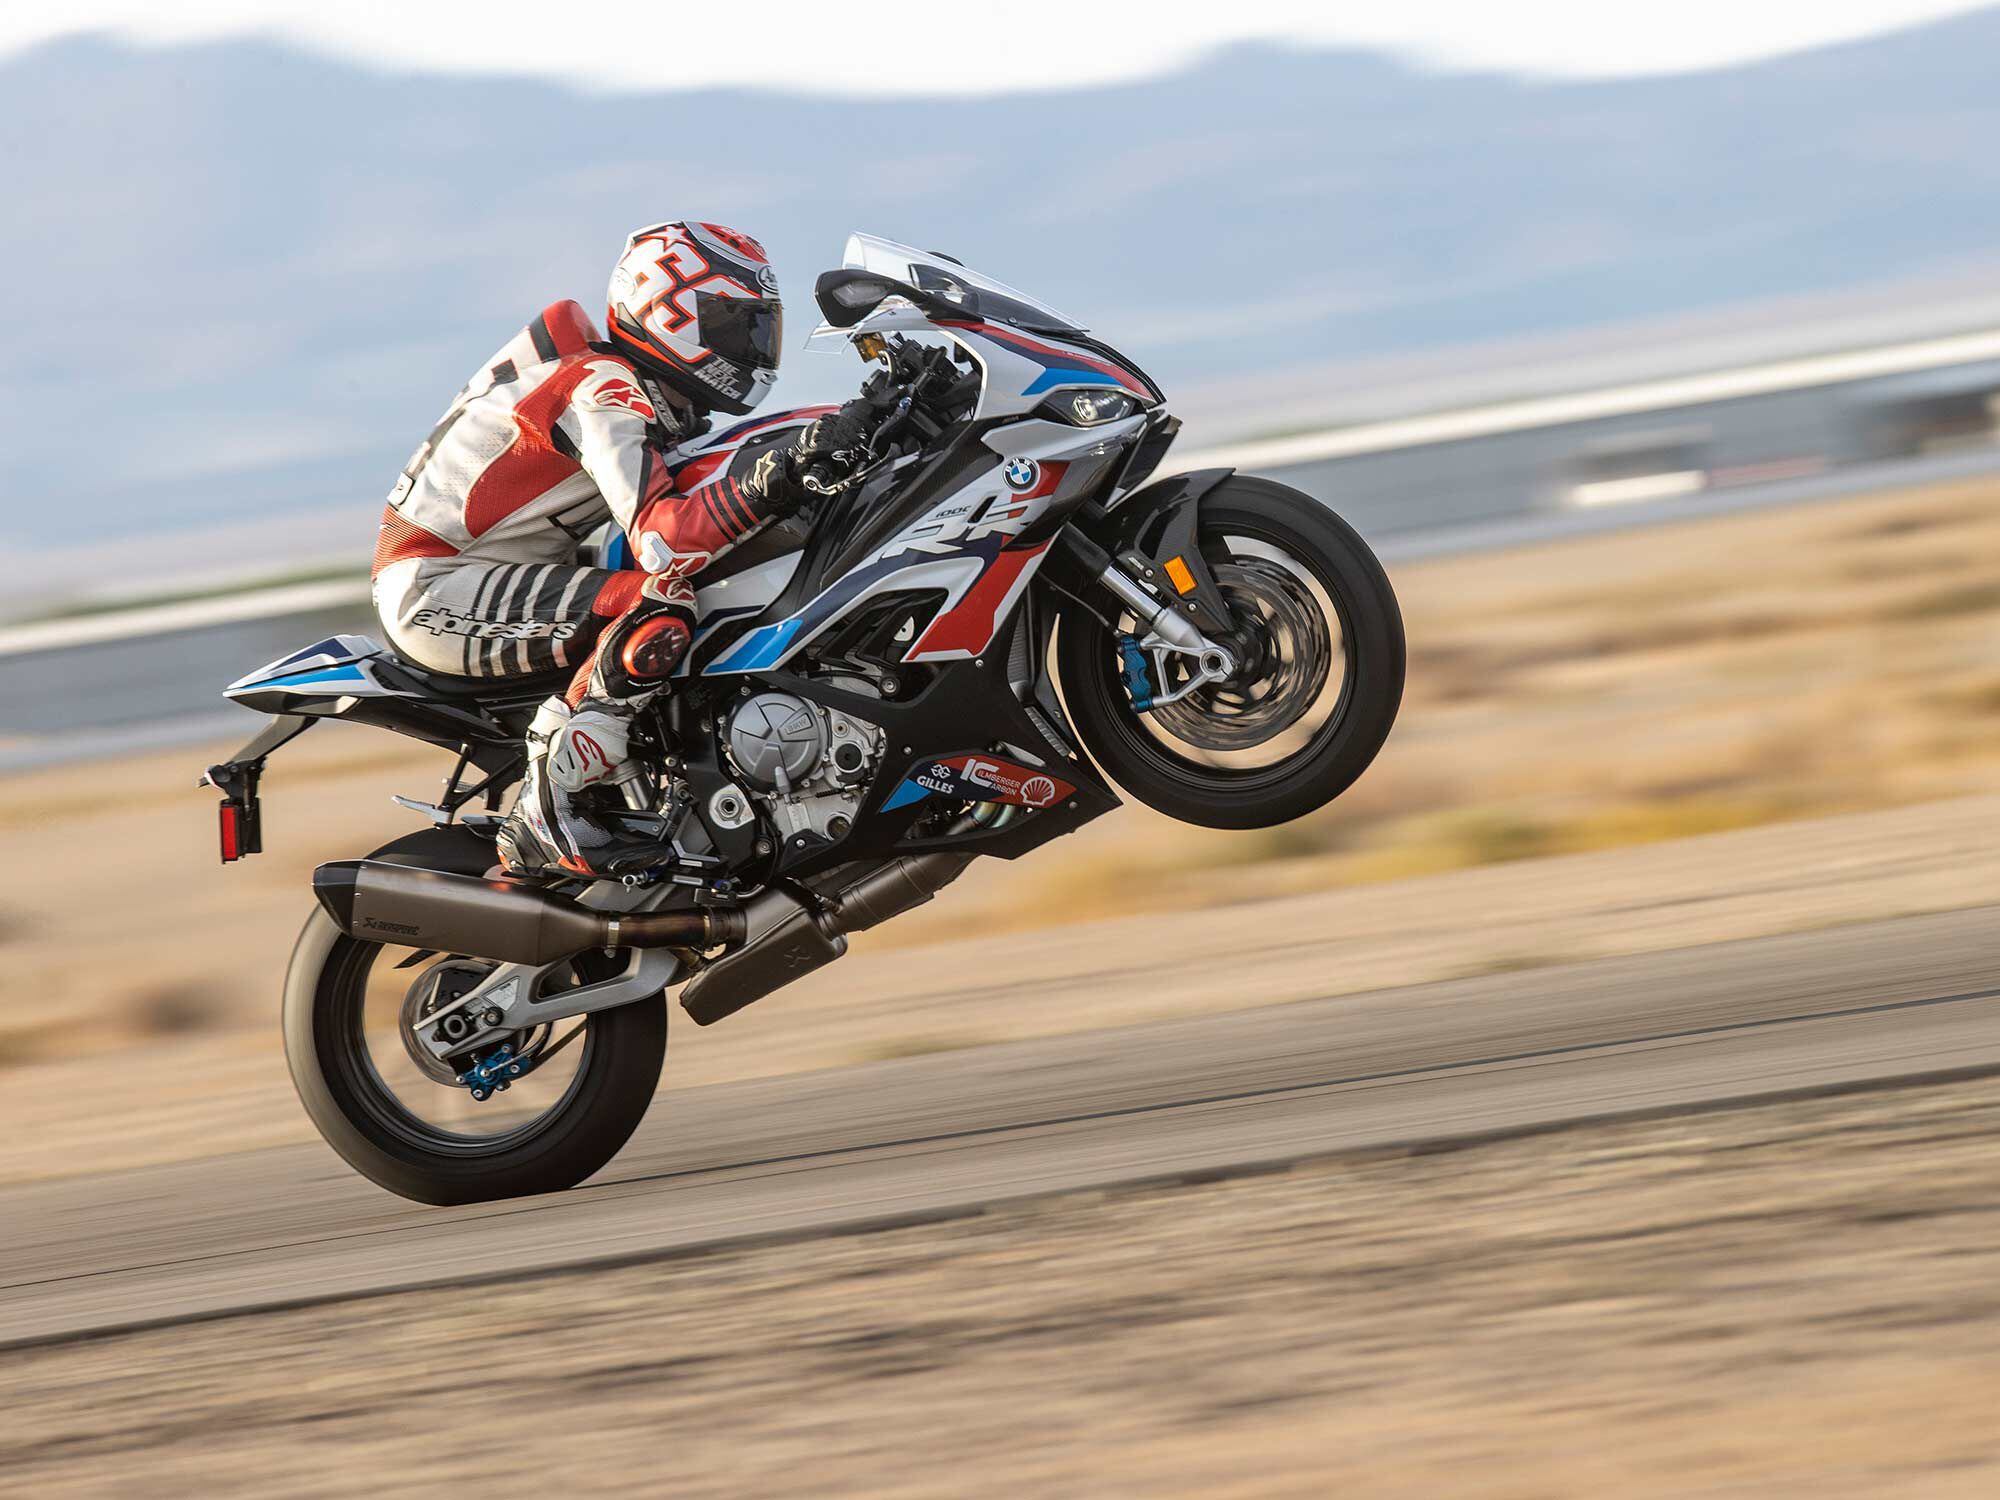 Lofted wheelies showcase the strong midrange torque and excellent chassis balance of the BMW M 1000 RR.